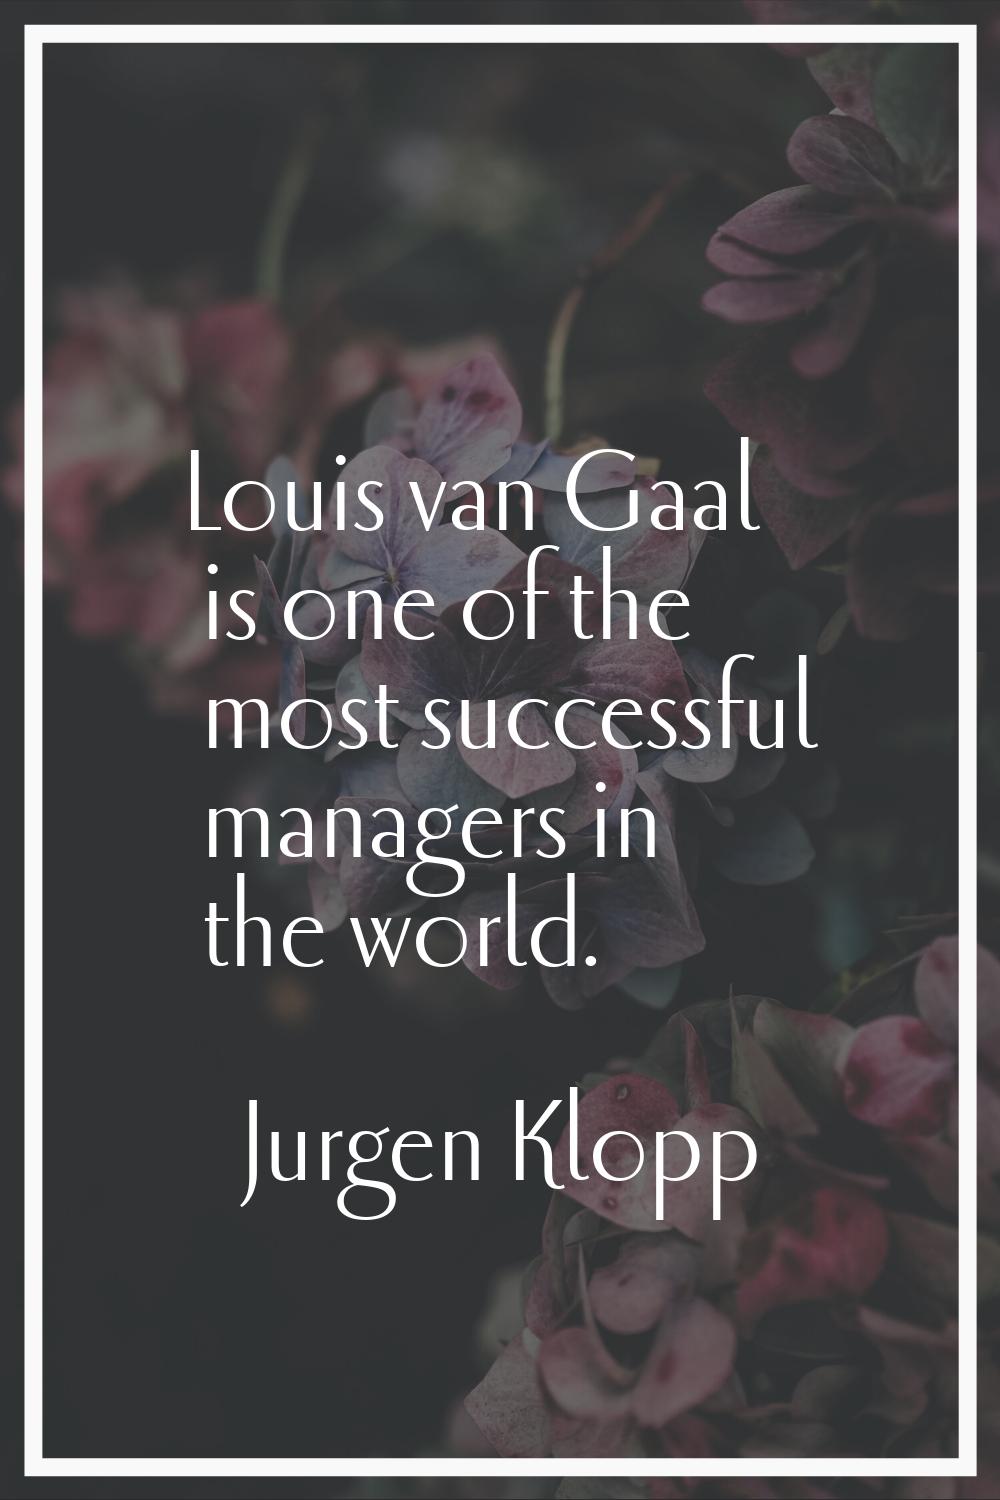 Louis van Gaal is one of the most successful managers in the world.